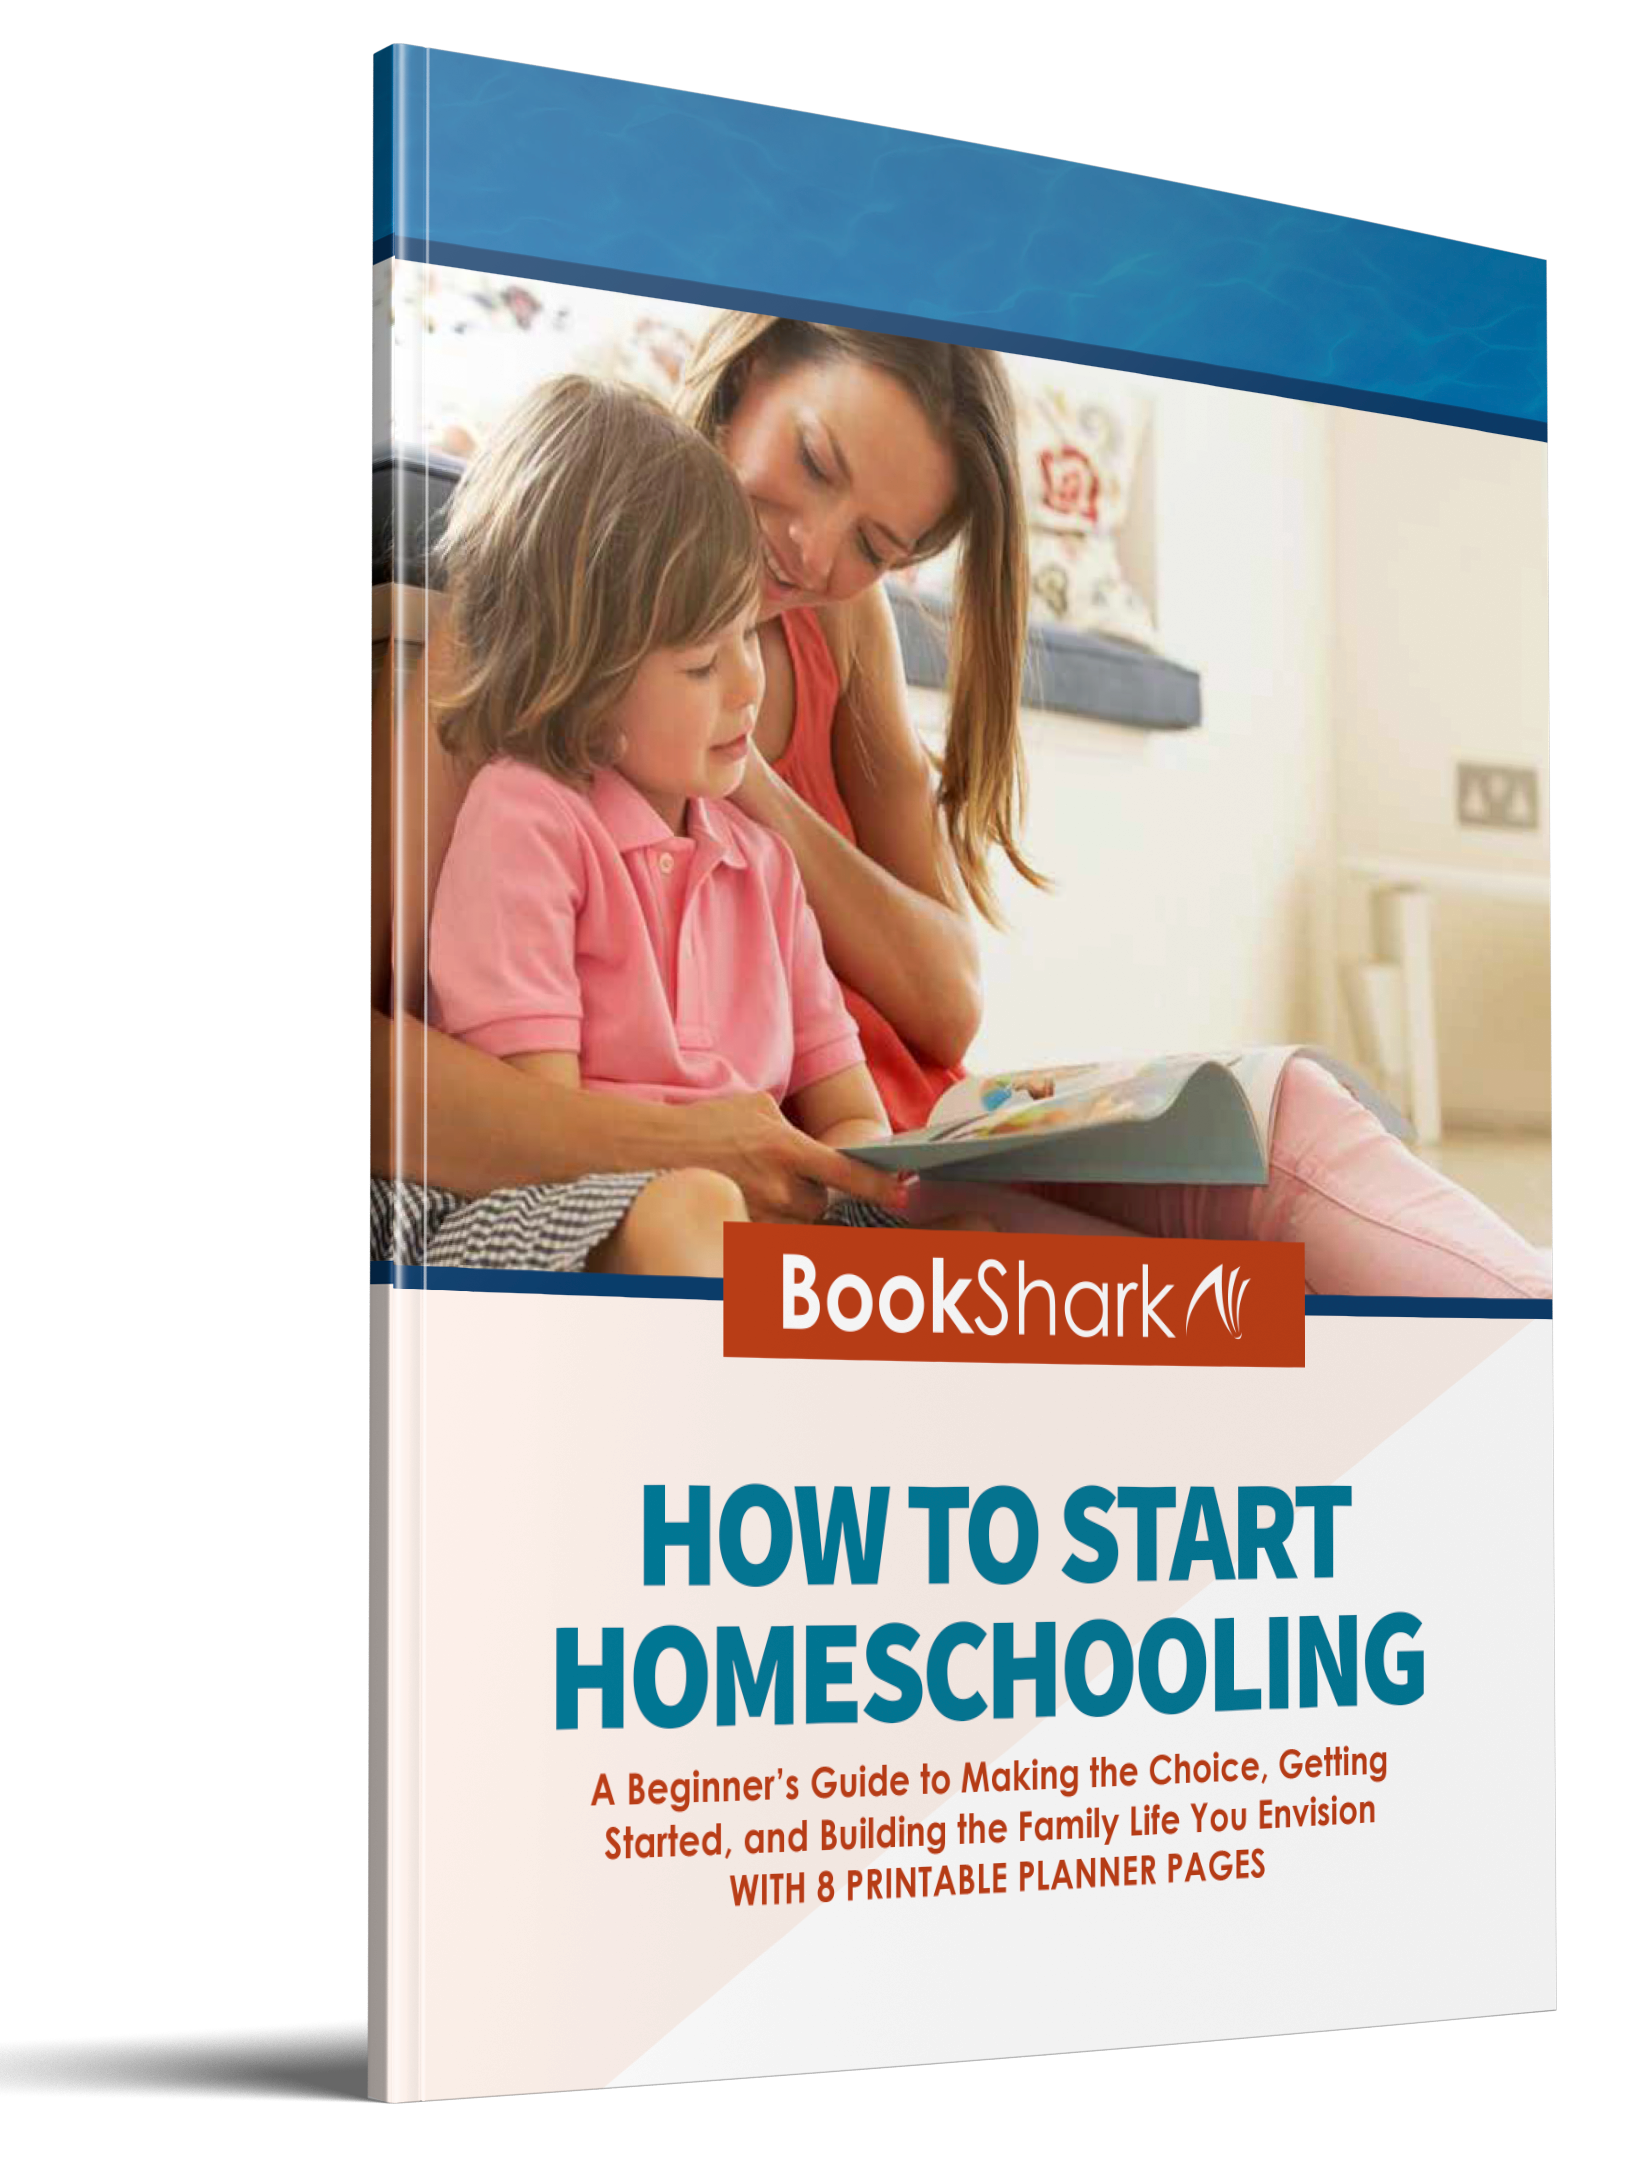 How to Start Homeschooling ebook cover